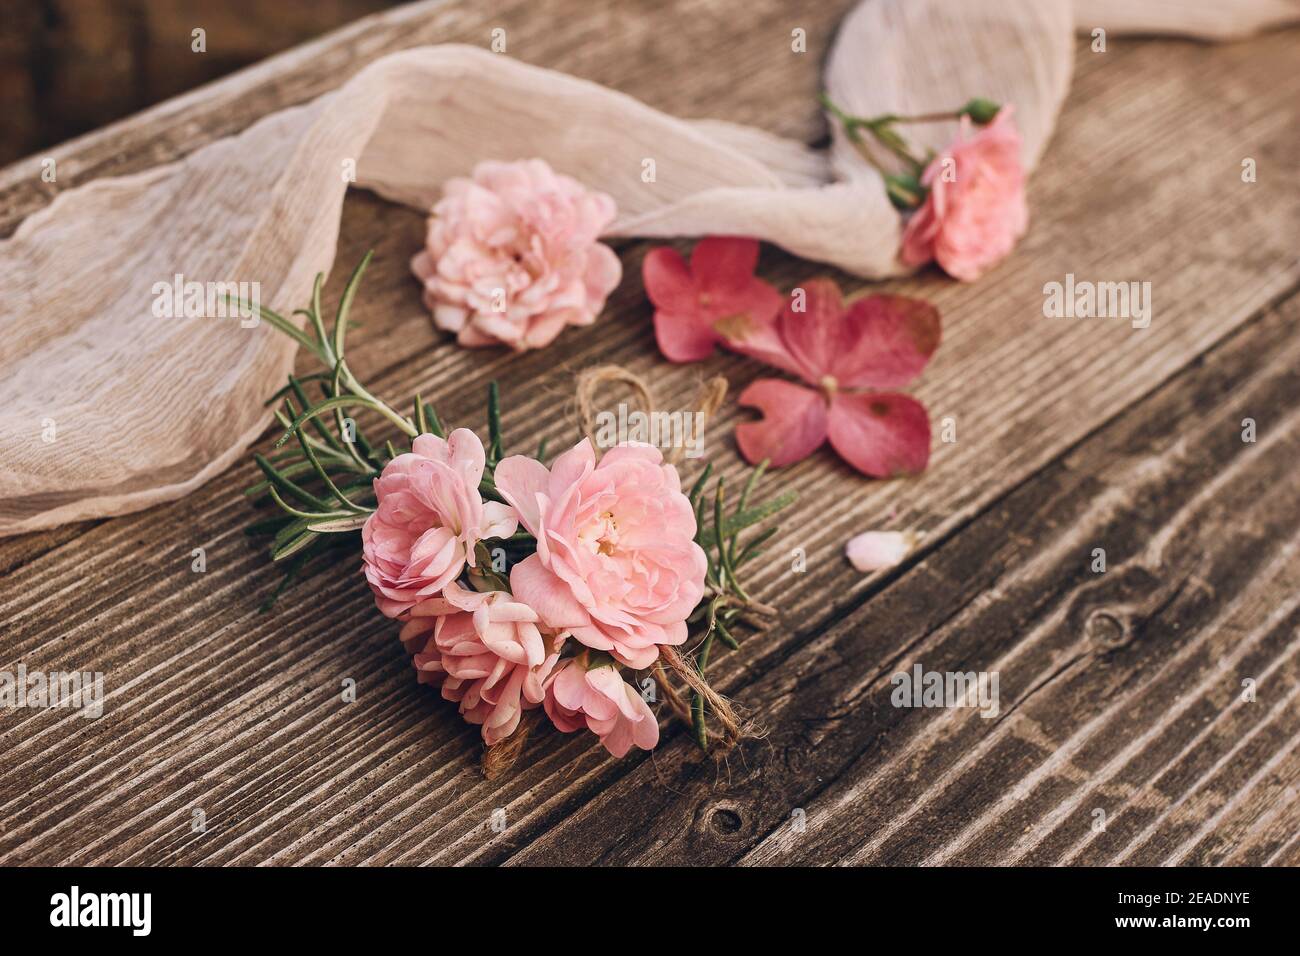 Summer feminine wedding styled stock photo. Floral composition with pink roses, hydrangea flowers and rosemary herb on old wooden table with silk Stock Photo